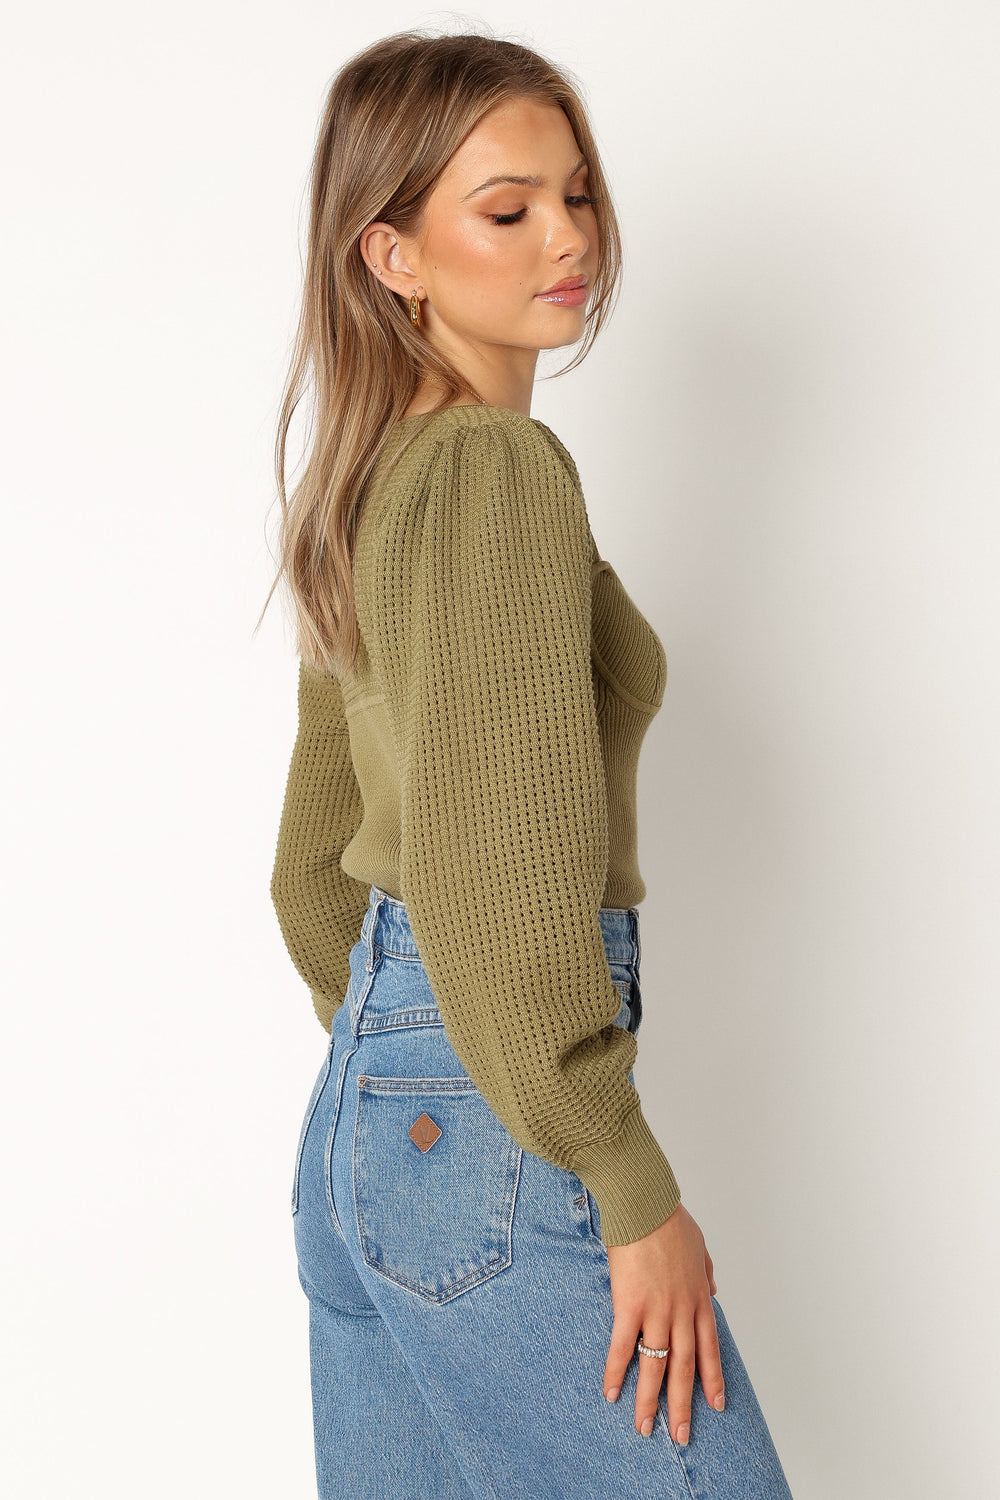 Petal and Pup USA KNITWEAR Madalyn Knit Sweater - Olive